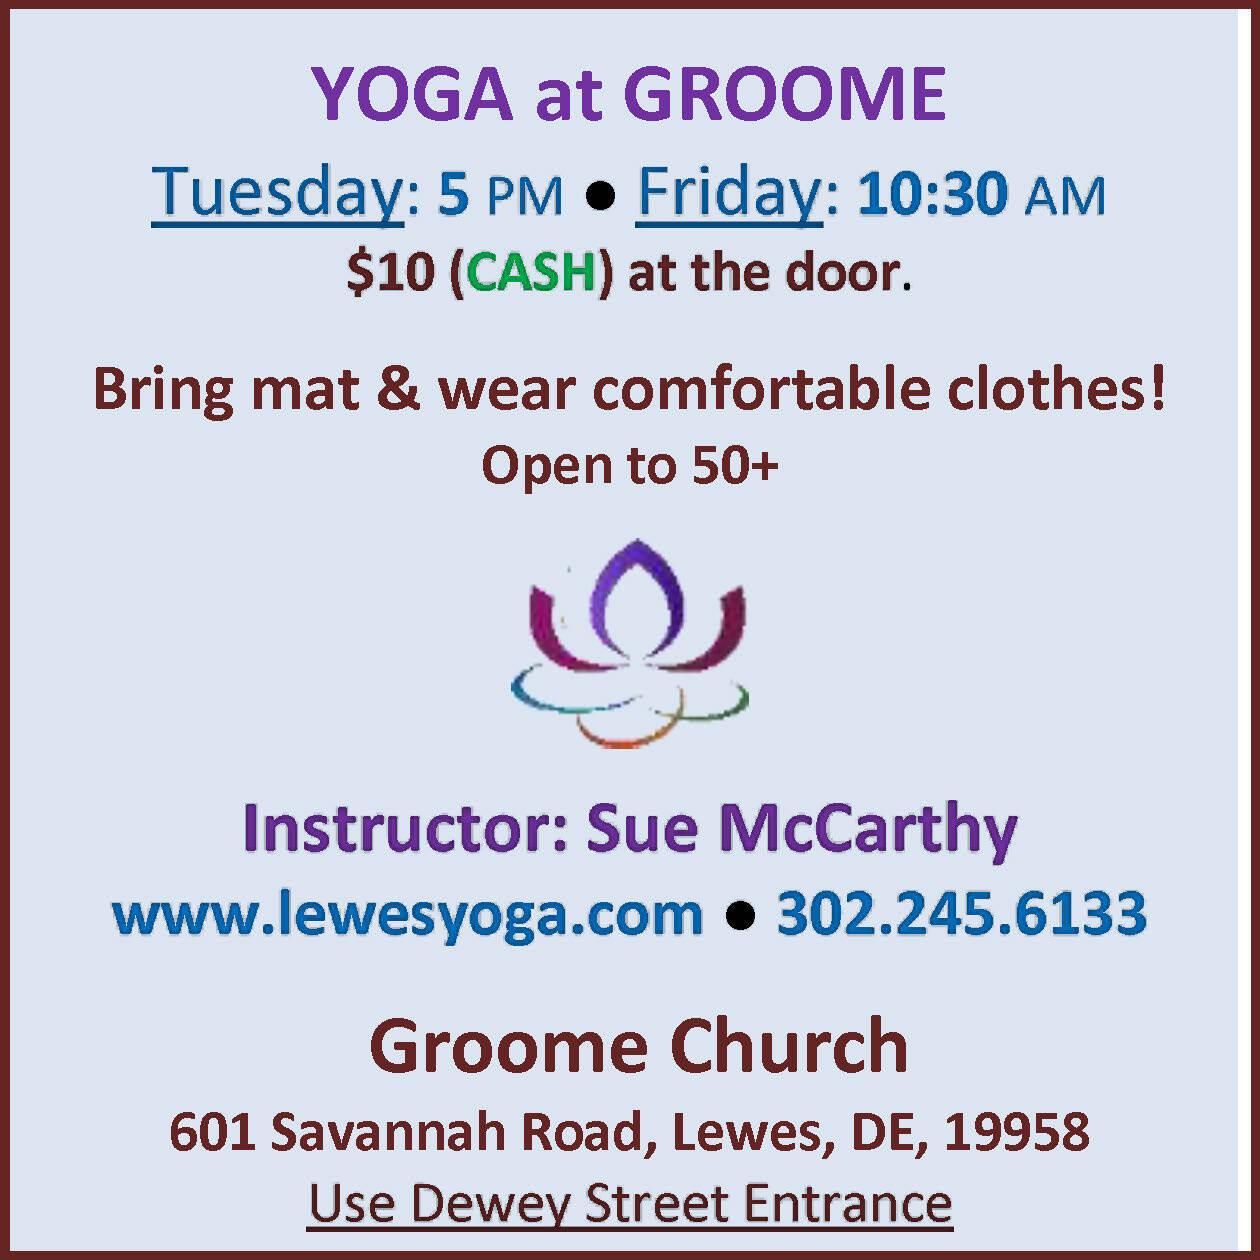 YOGA at GROOME FINAL AD 11 02 22